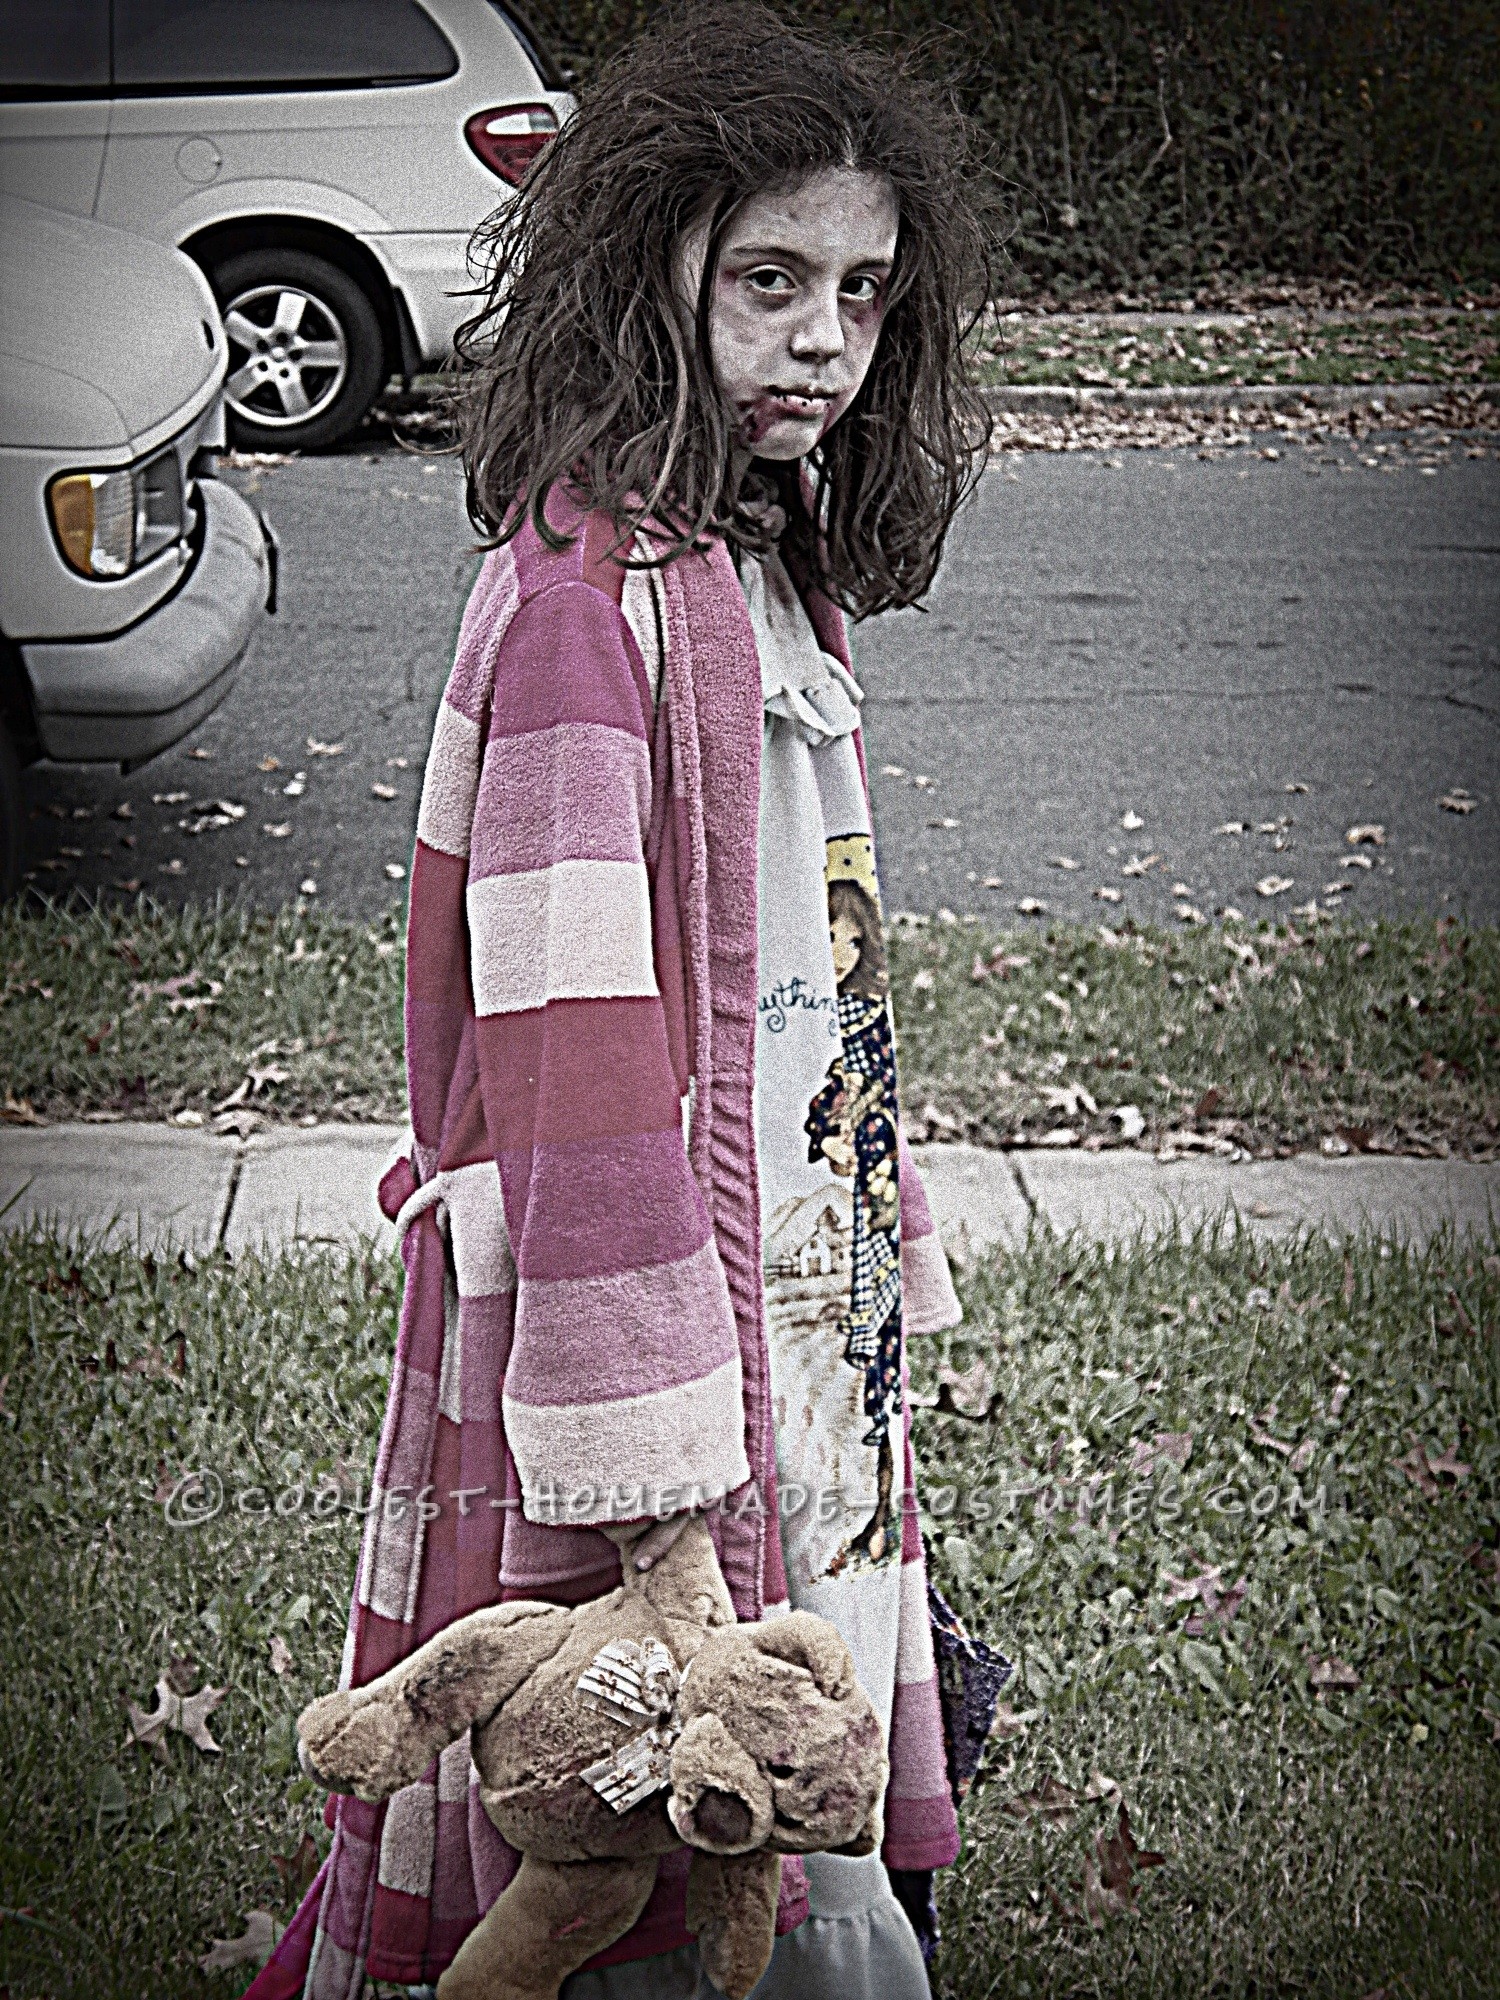 Scary Homemade Costume for a Girl: Little Zombie Girl